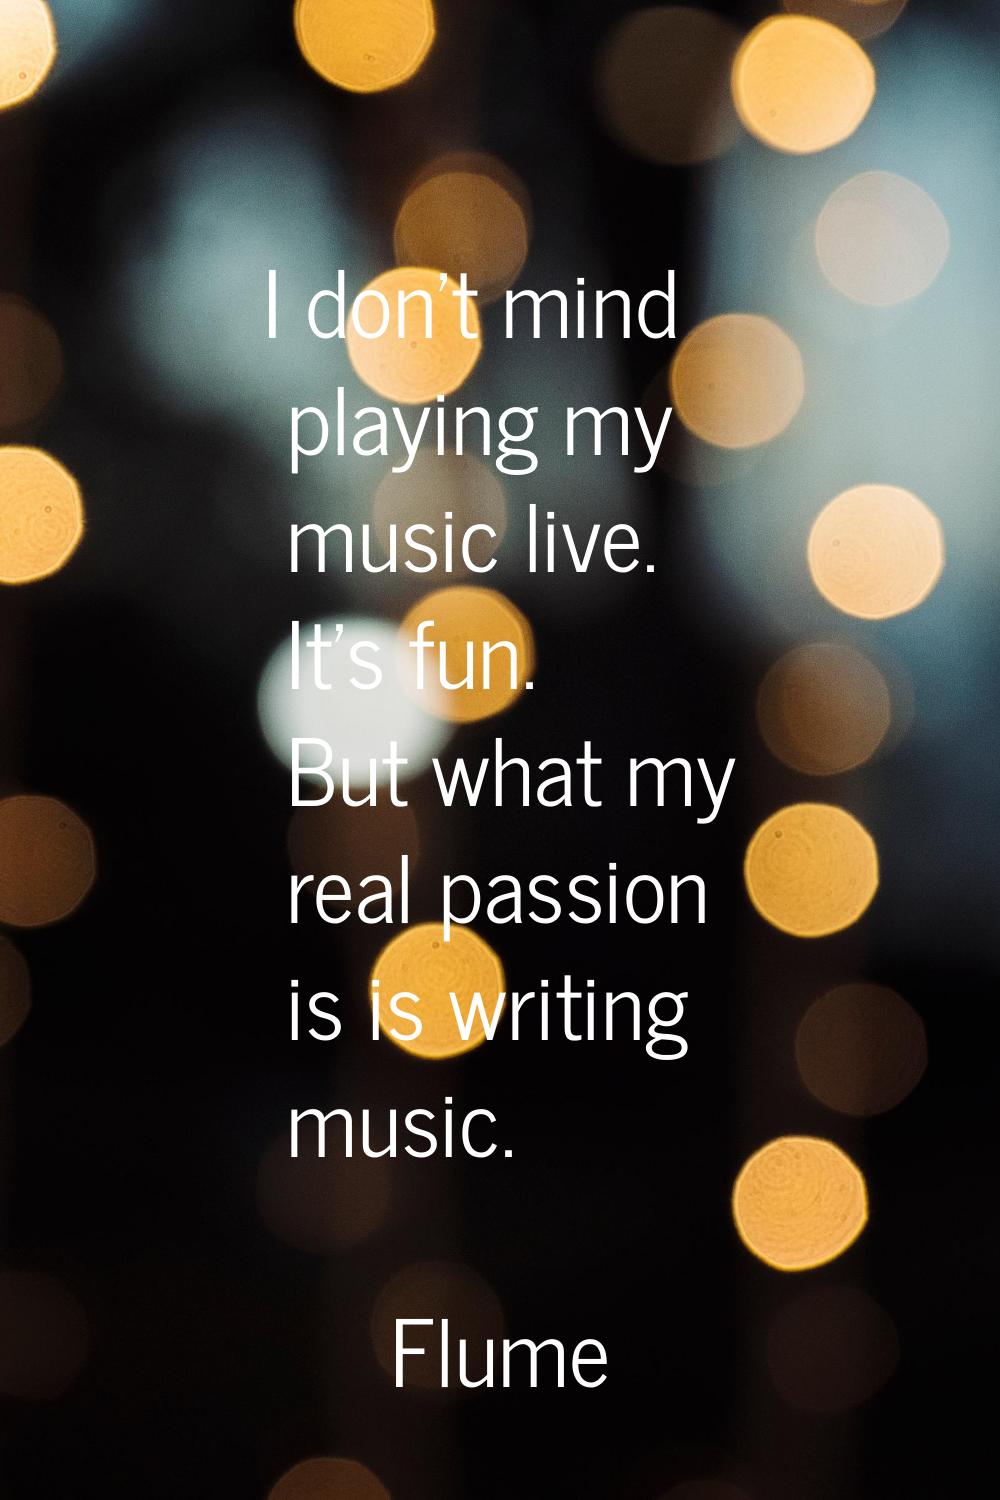 I don't mind playing my music live. It's fun. But what my real passion is is writing music.